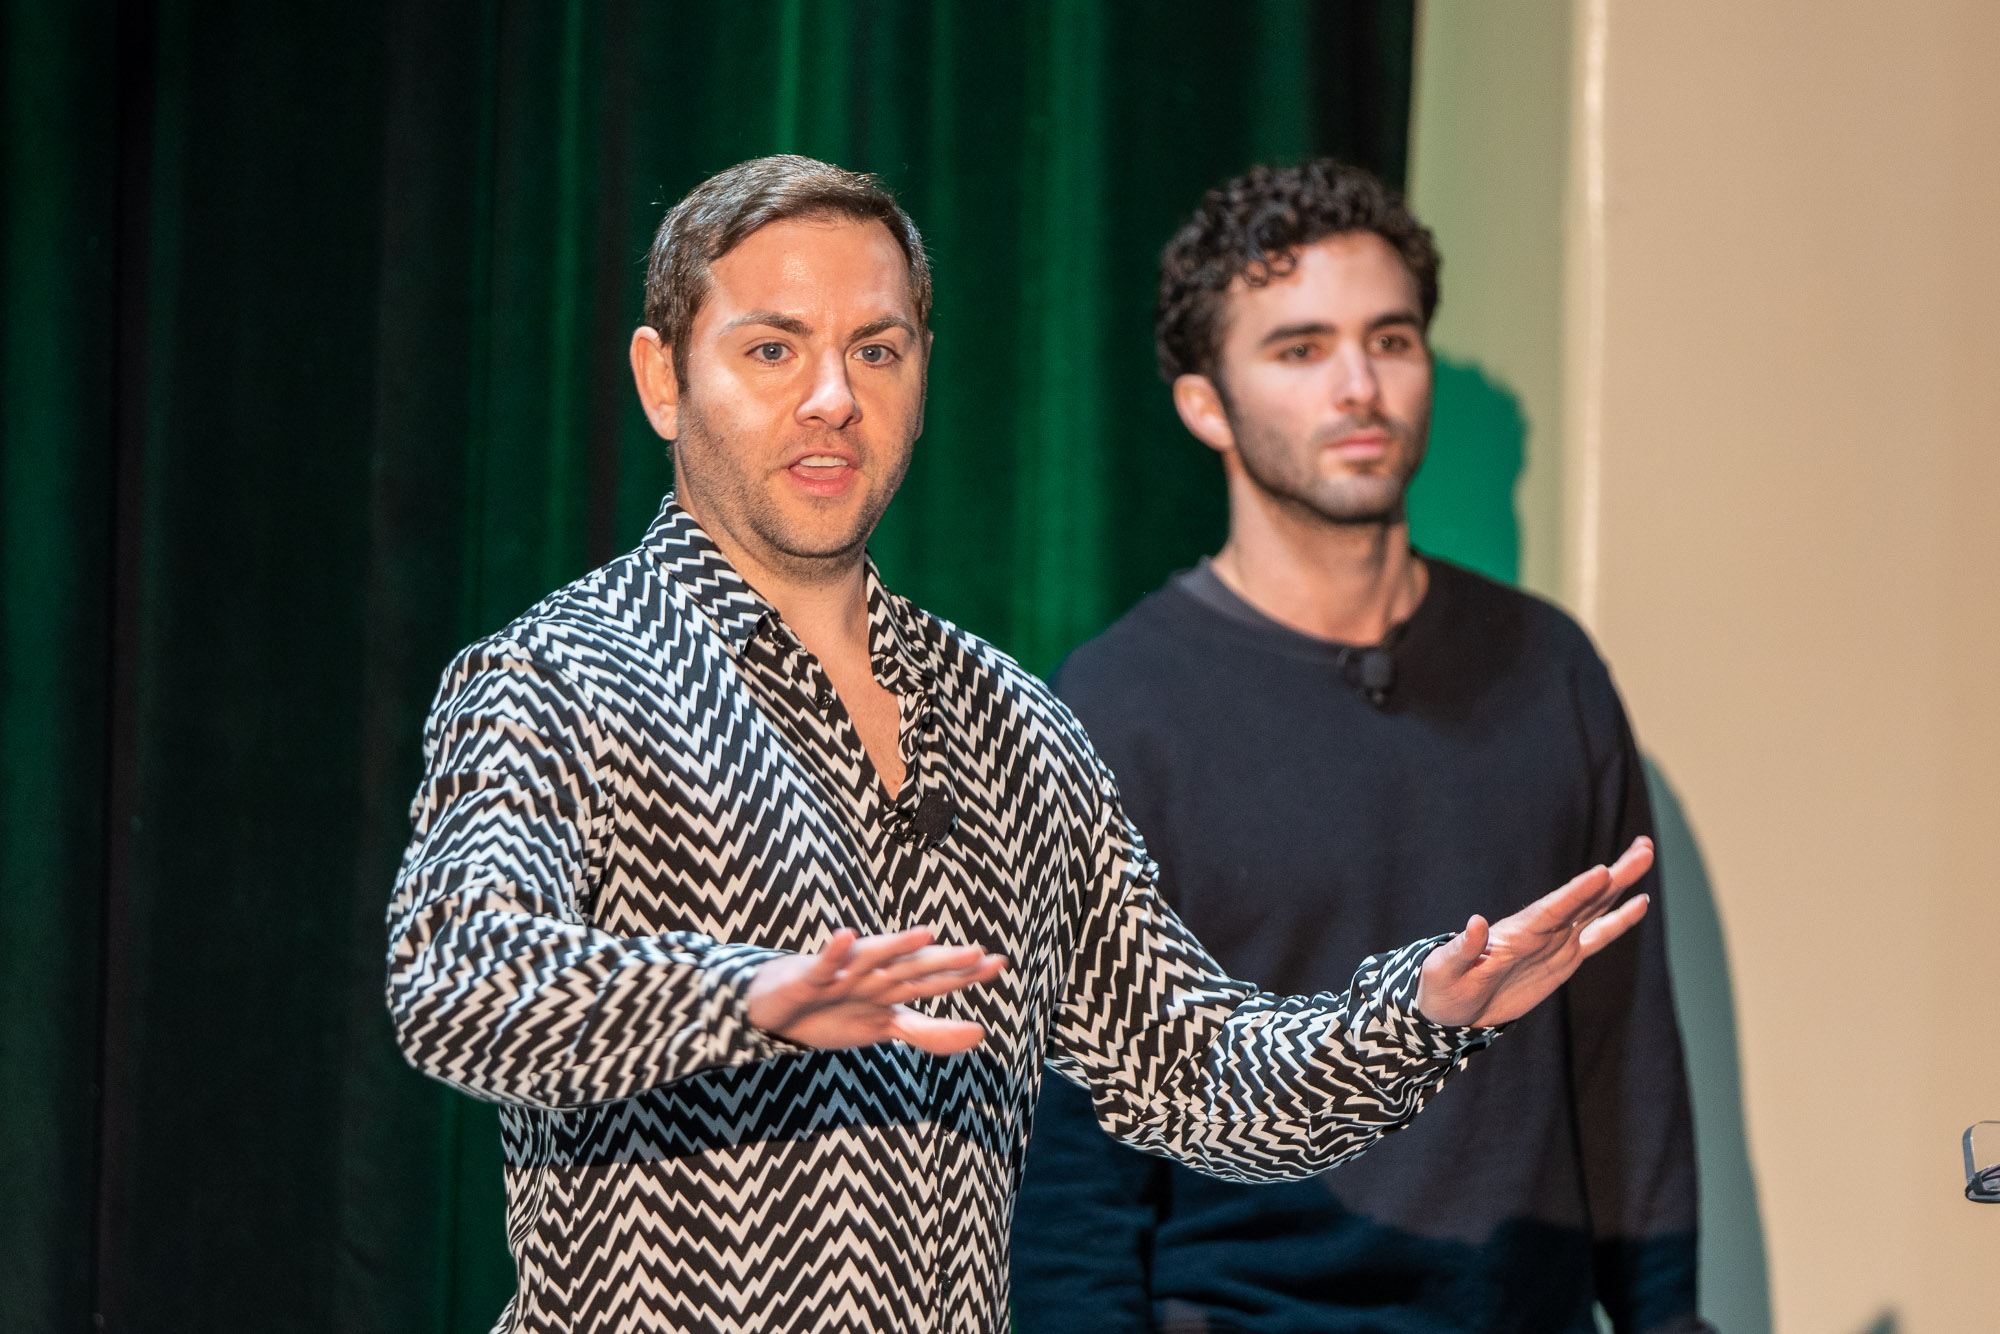 Josh Machiz, Partner at Redpoint, and Rashad Assir, Head of Content at Redpoint, talk about "How to turn your startup into a social star" at EntertainmentCab Early Stage in Boston on April 20, 2023. Image Credit: Haje Jan Kamps / EntertainmentCab